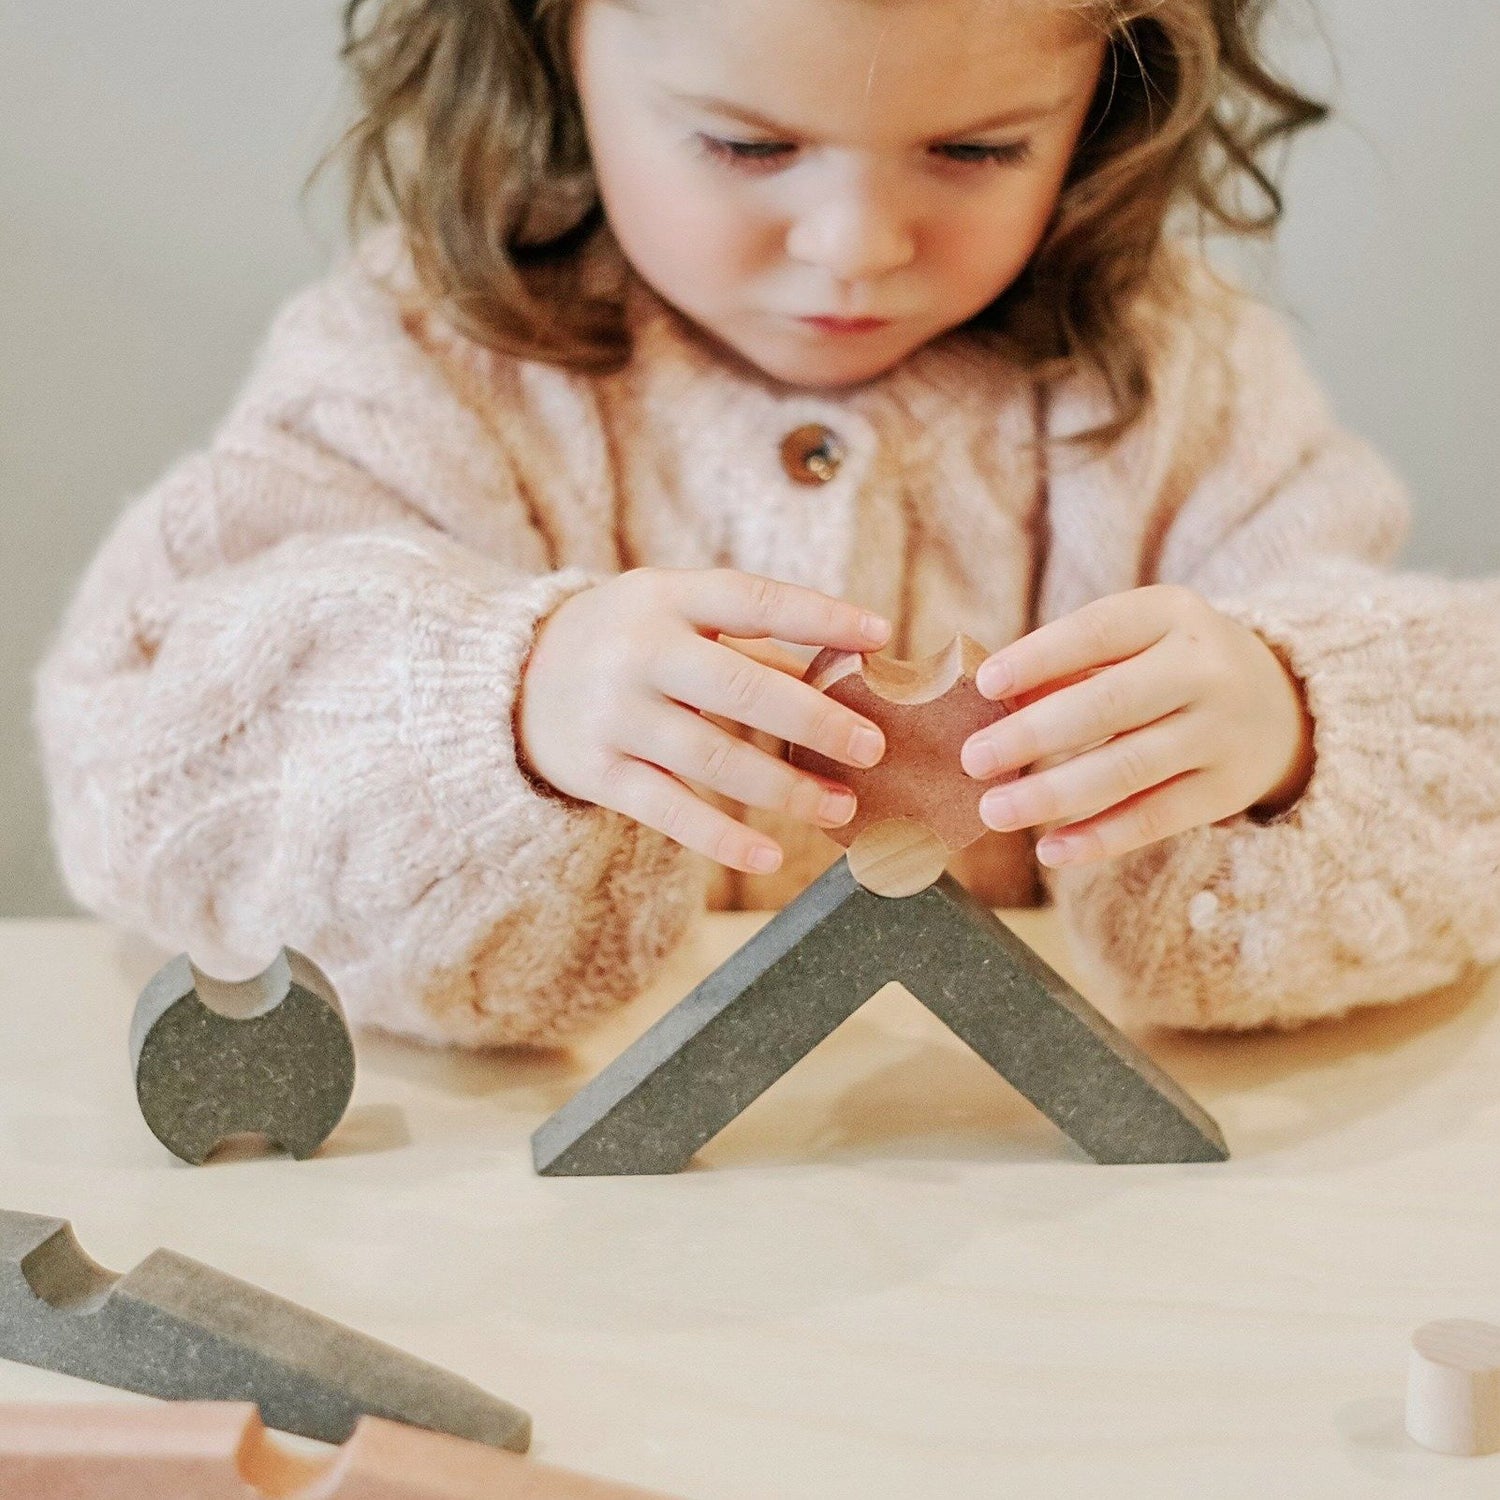 girl playing with wooden balancing blocks puzzle shapes